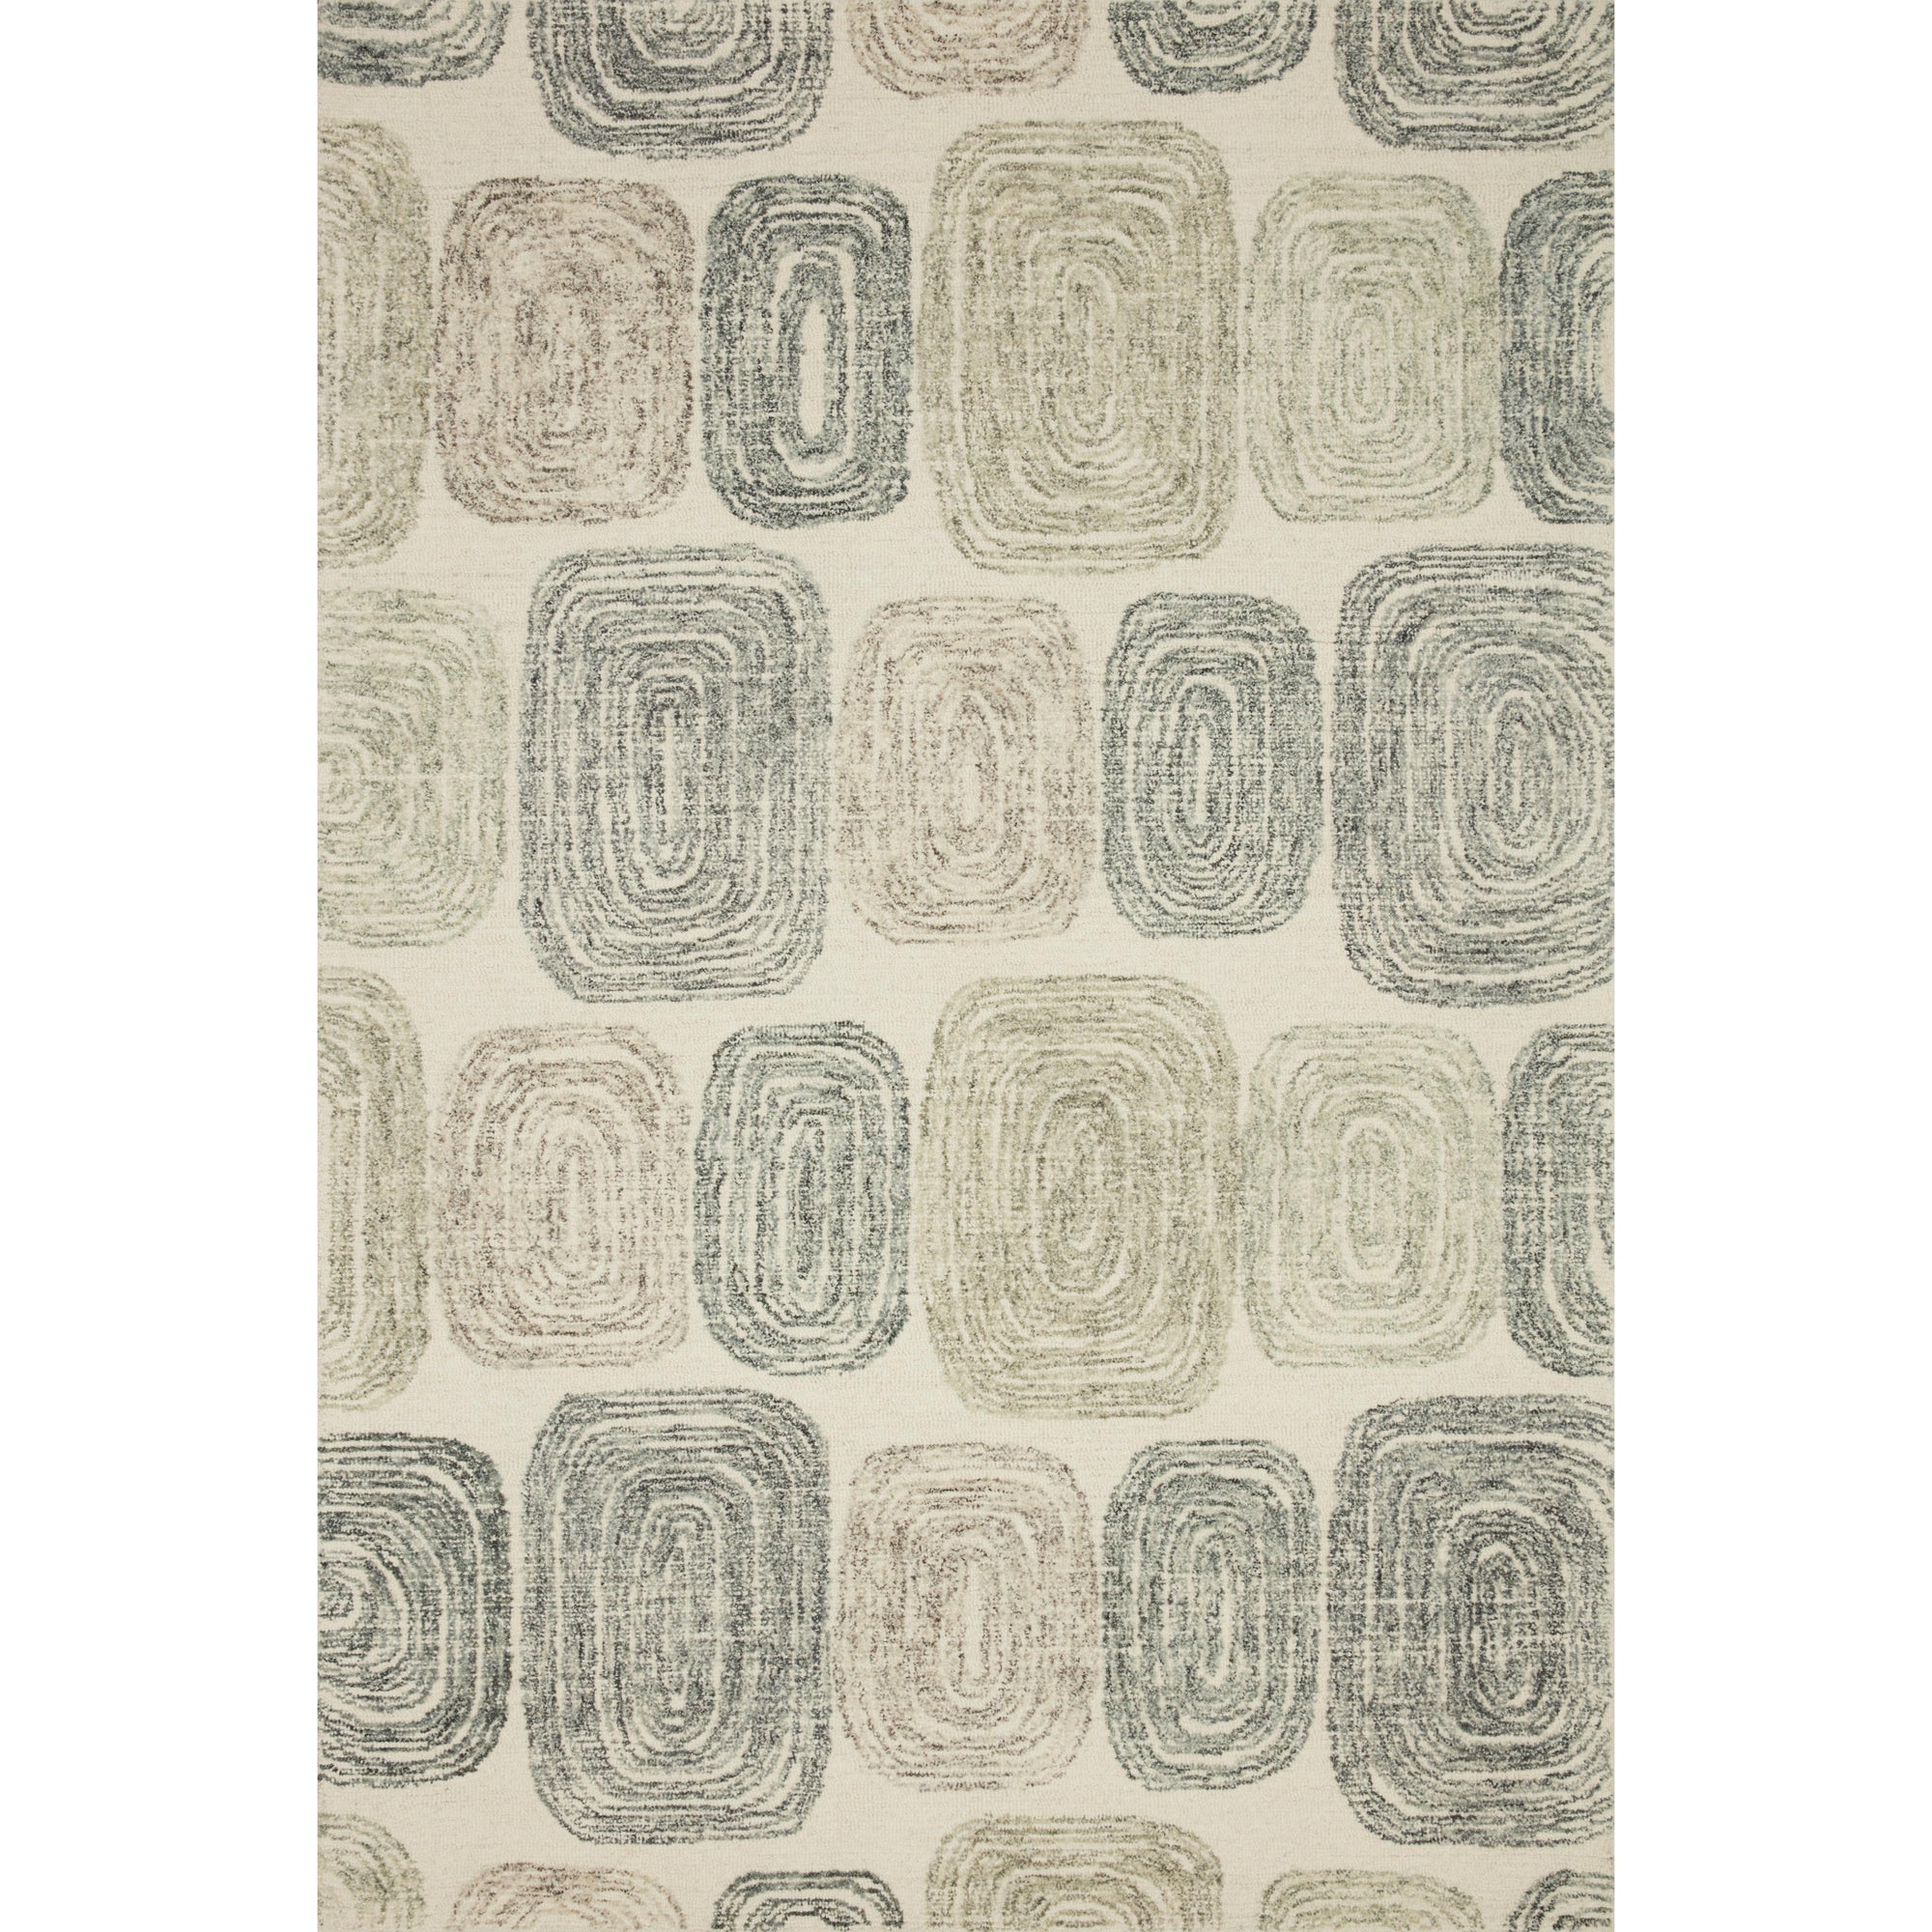 Rugs by Roo Loloi Milo Dk. Grey Neutral Area Rug in size 18" x 18" Sample